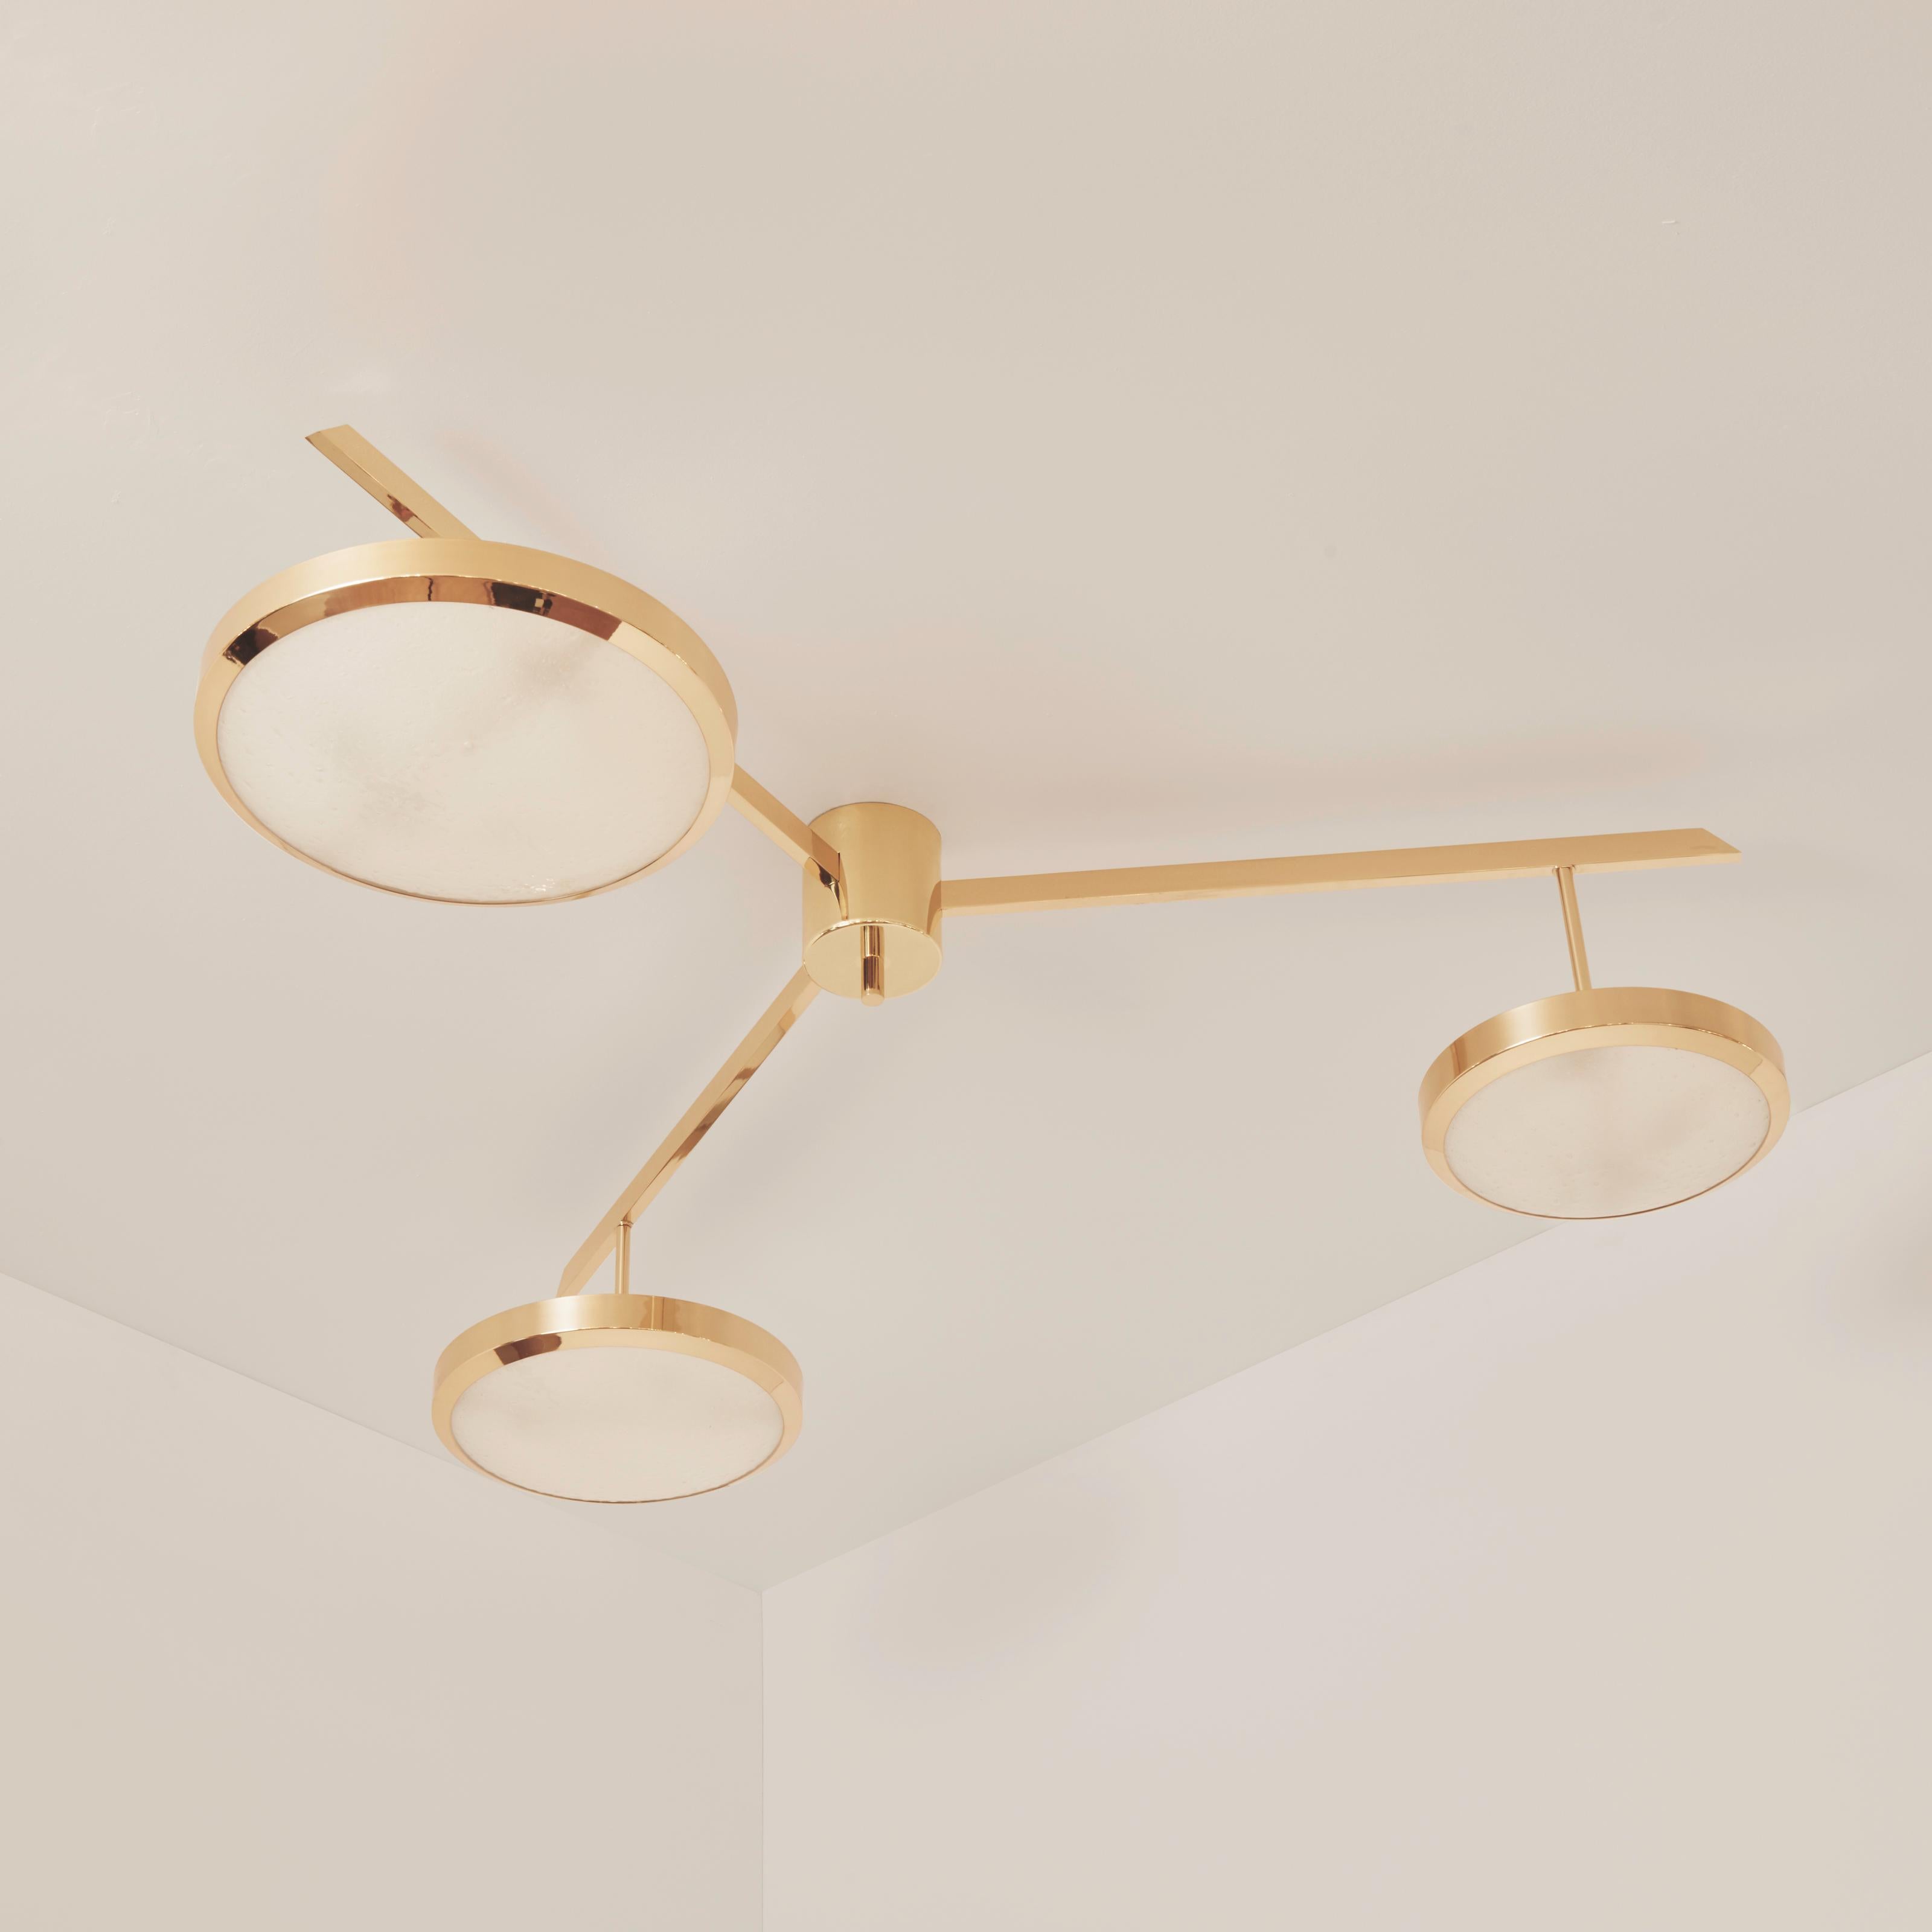 Modern Tre Ceiling Light by Gaspare Asaro - Polished Brass Finish For Sale